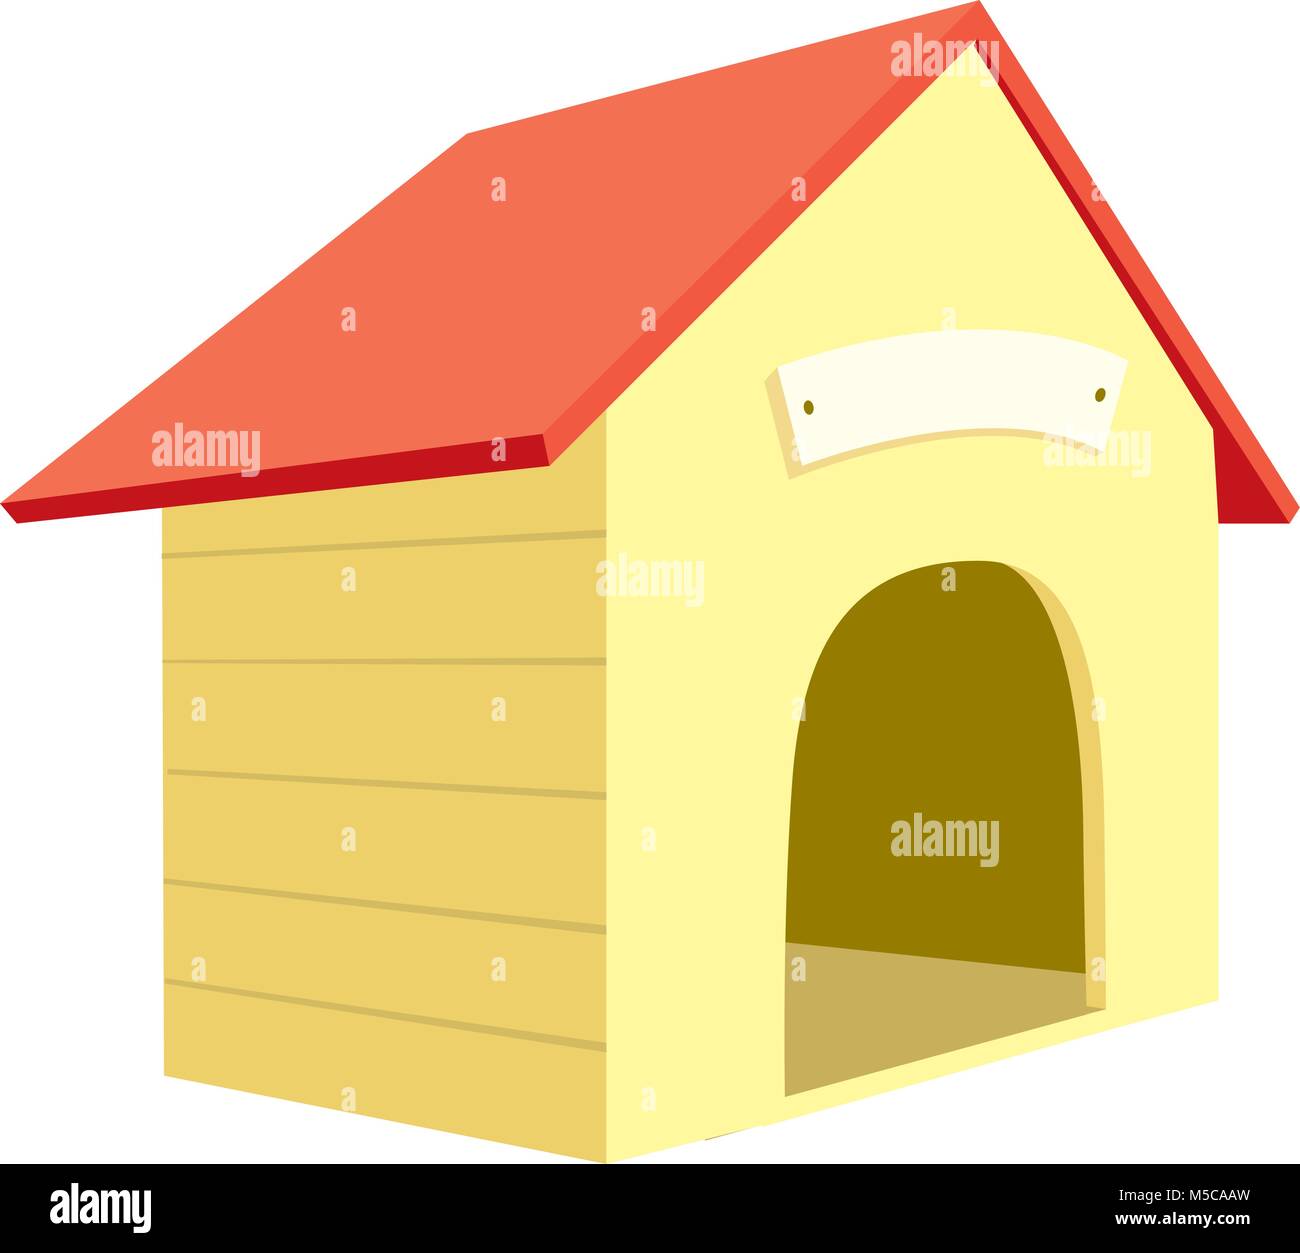 Cartoon illustration of empty dog house or kennel Stock Vector